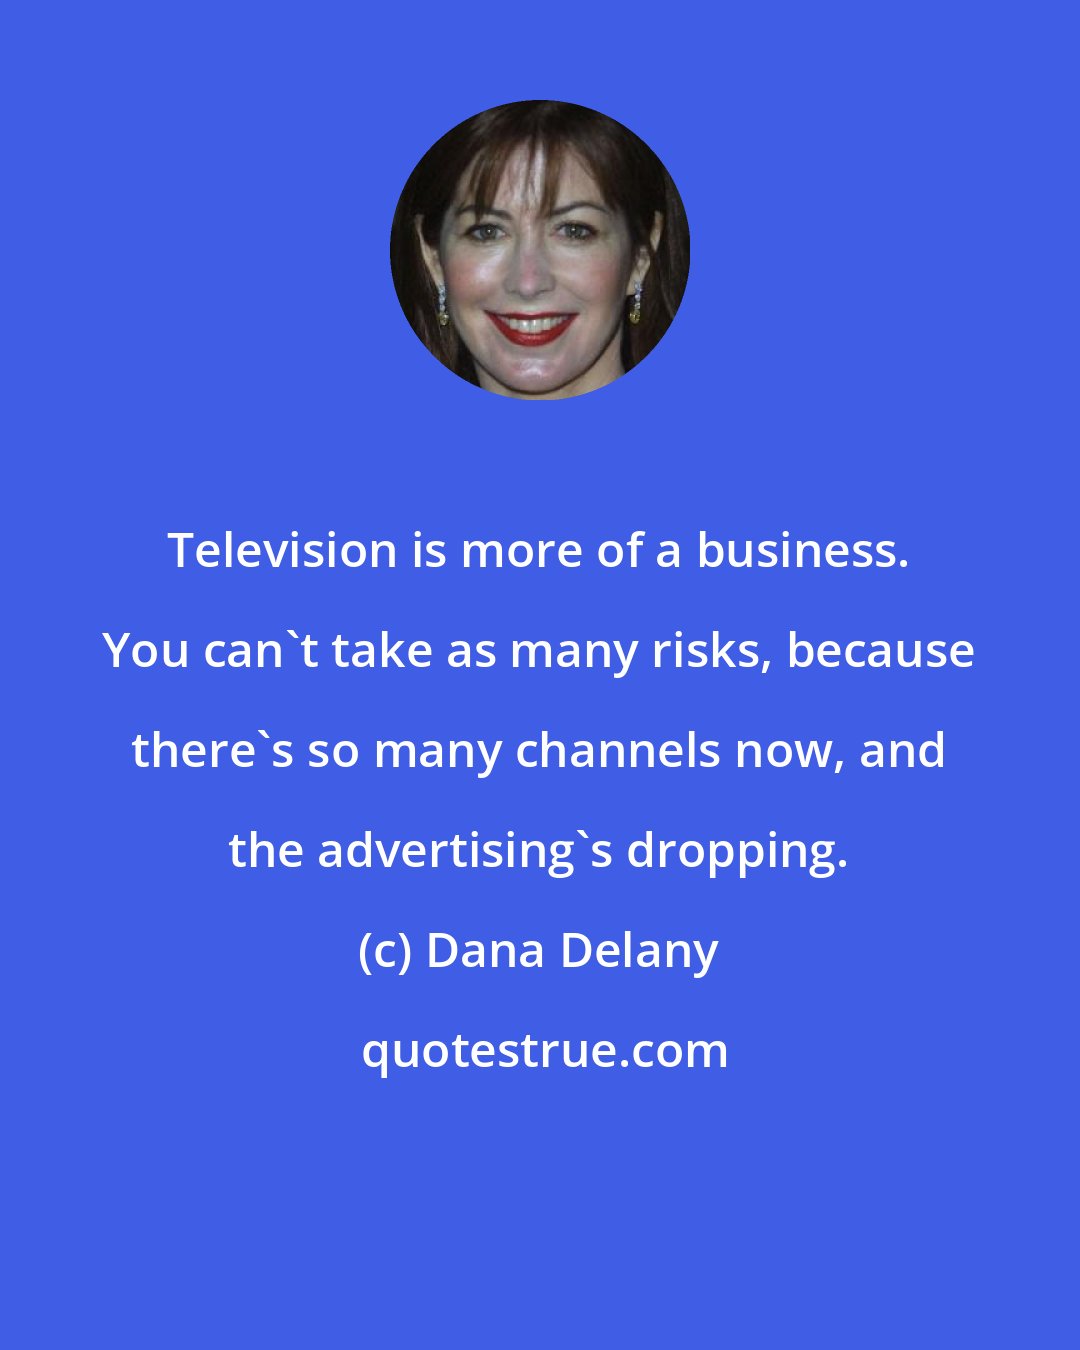 Dana Delany: Television is more of a business. You can't take as many risks, because there's so many channels now, and the advertising's dropping.